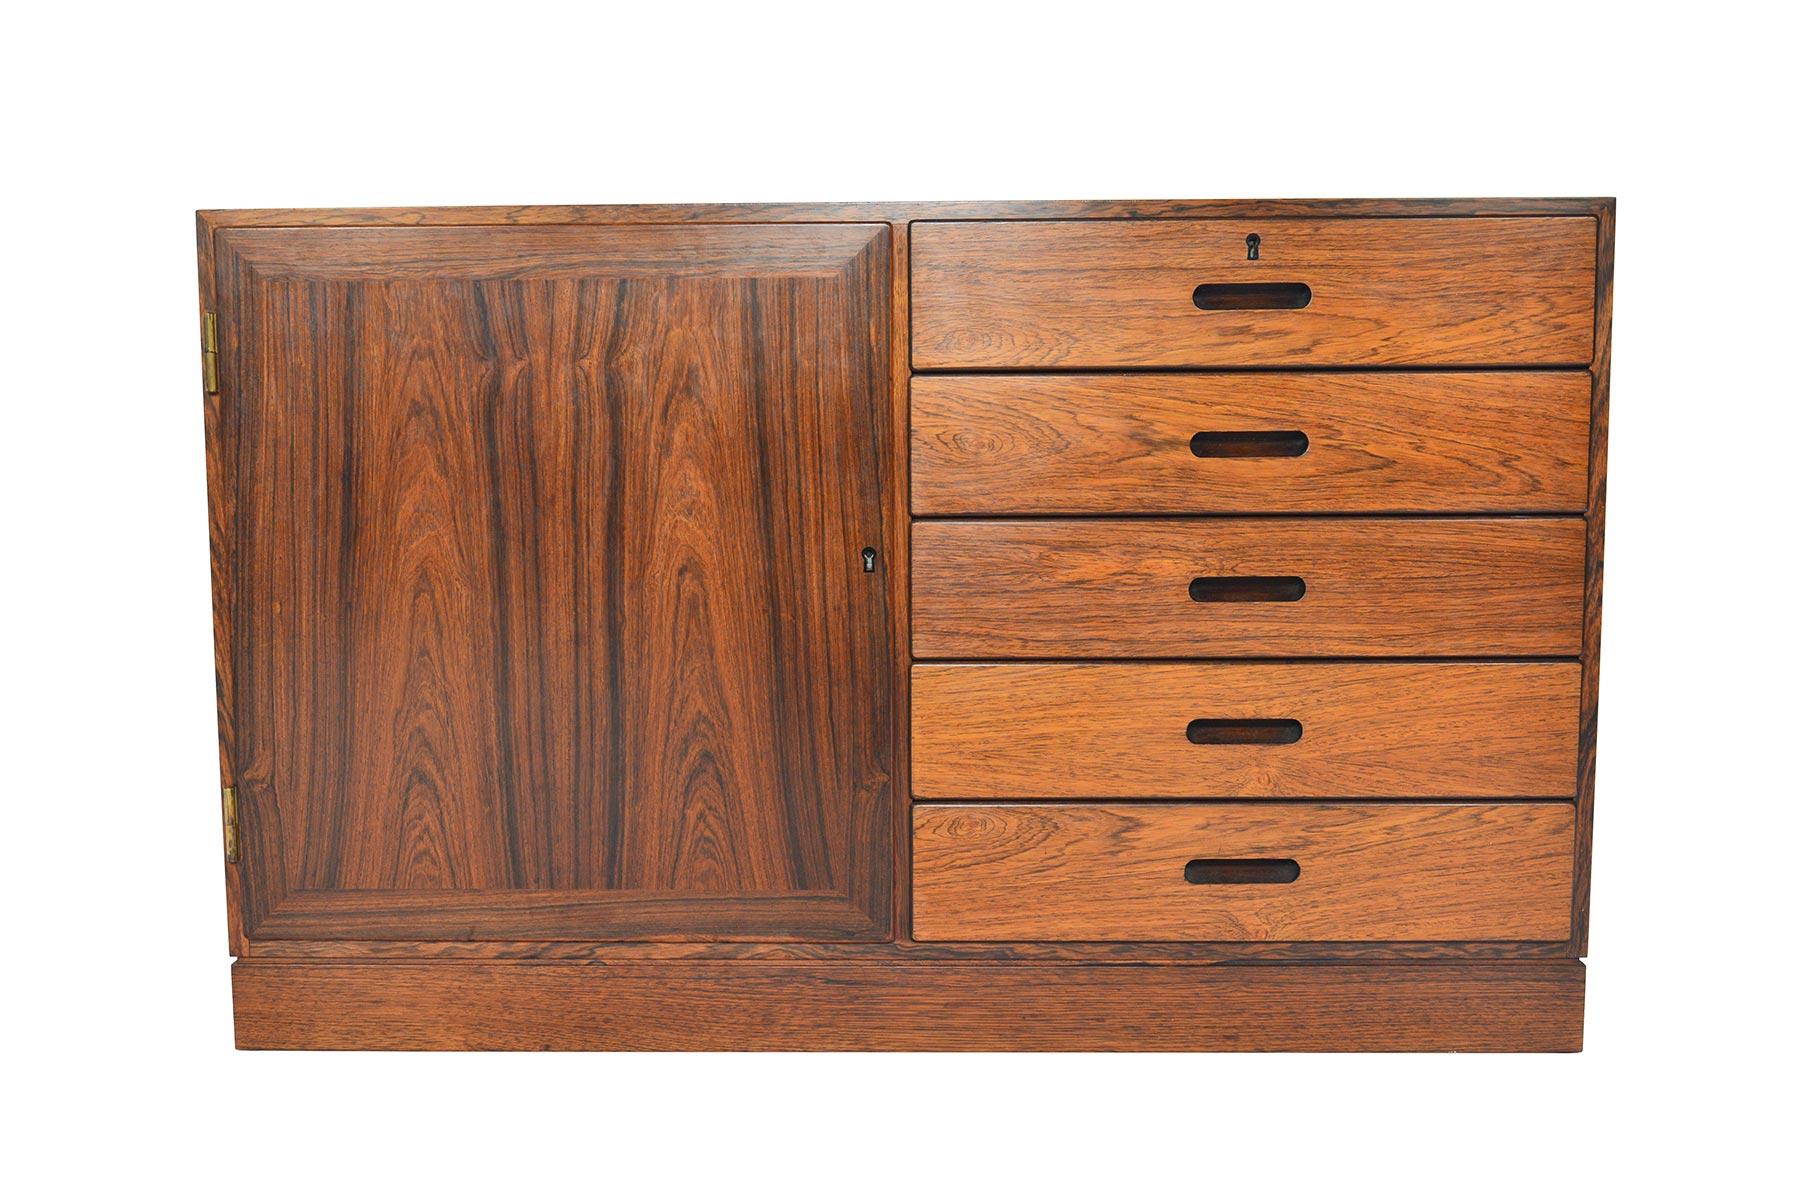 This stunning Danish modern midcentury credenza dates to the 1960s and is perfectly sized for any modern home. Crafted in Brazilian rosewood, this gorgeous piece was designed by Kai Winding for Poul Jeppesen Mobelfabrik. This credenza features a